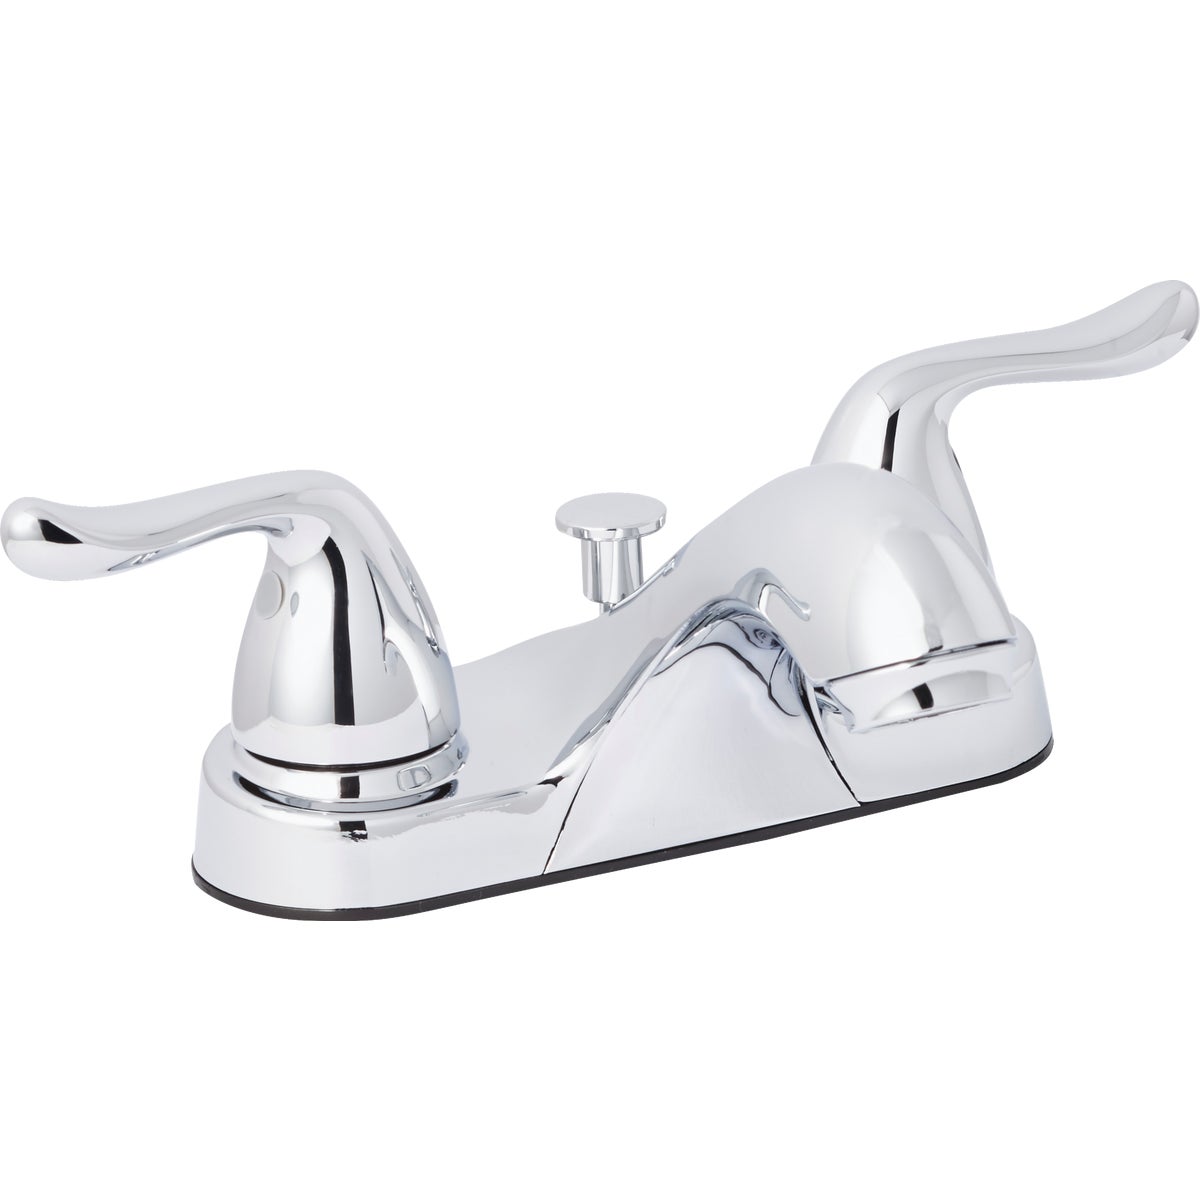 Item 404215, 2 handle lavatory metal faucet with pop-up.